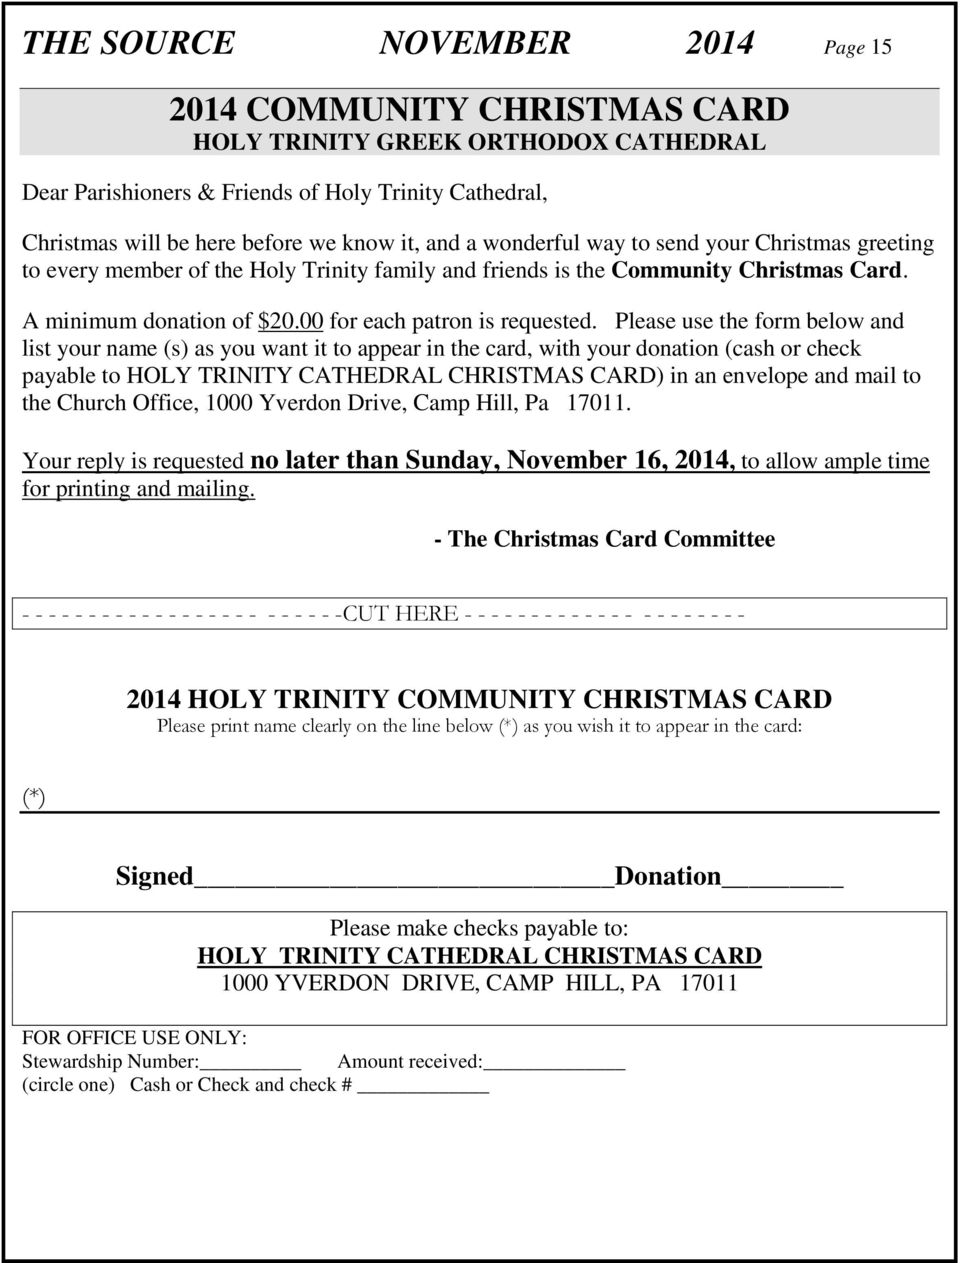 Please use the form below and list your name (s) as you want it to appear in the card, with your donation (cash or check payable to HOLY TRINITY CATHEDRAL CHRISTMAS CARD) in an envelope and mail to